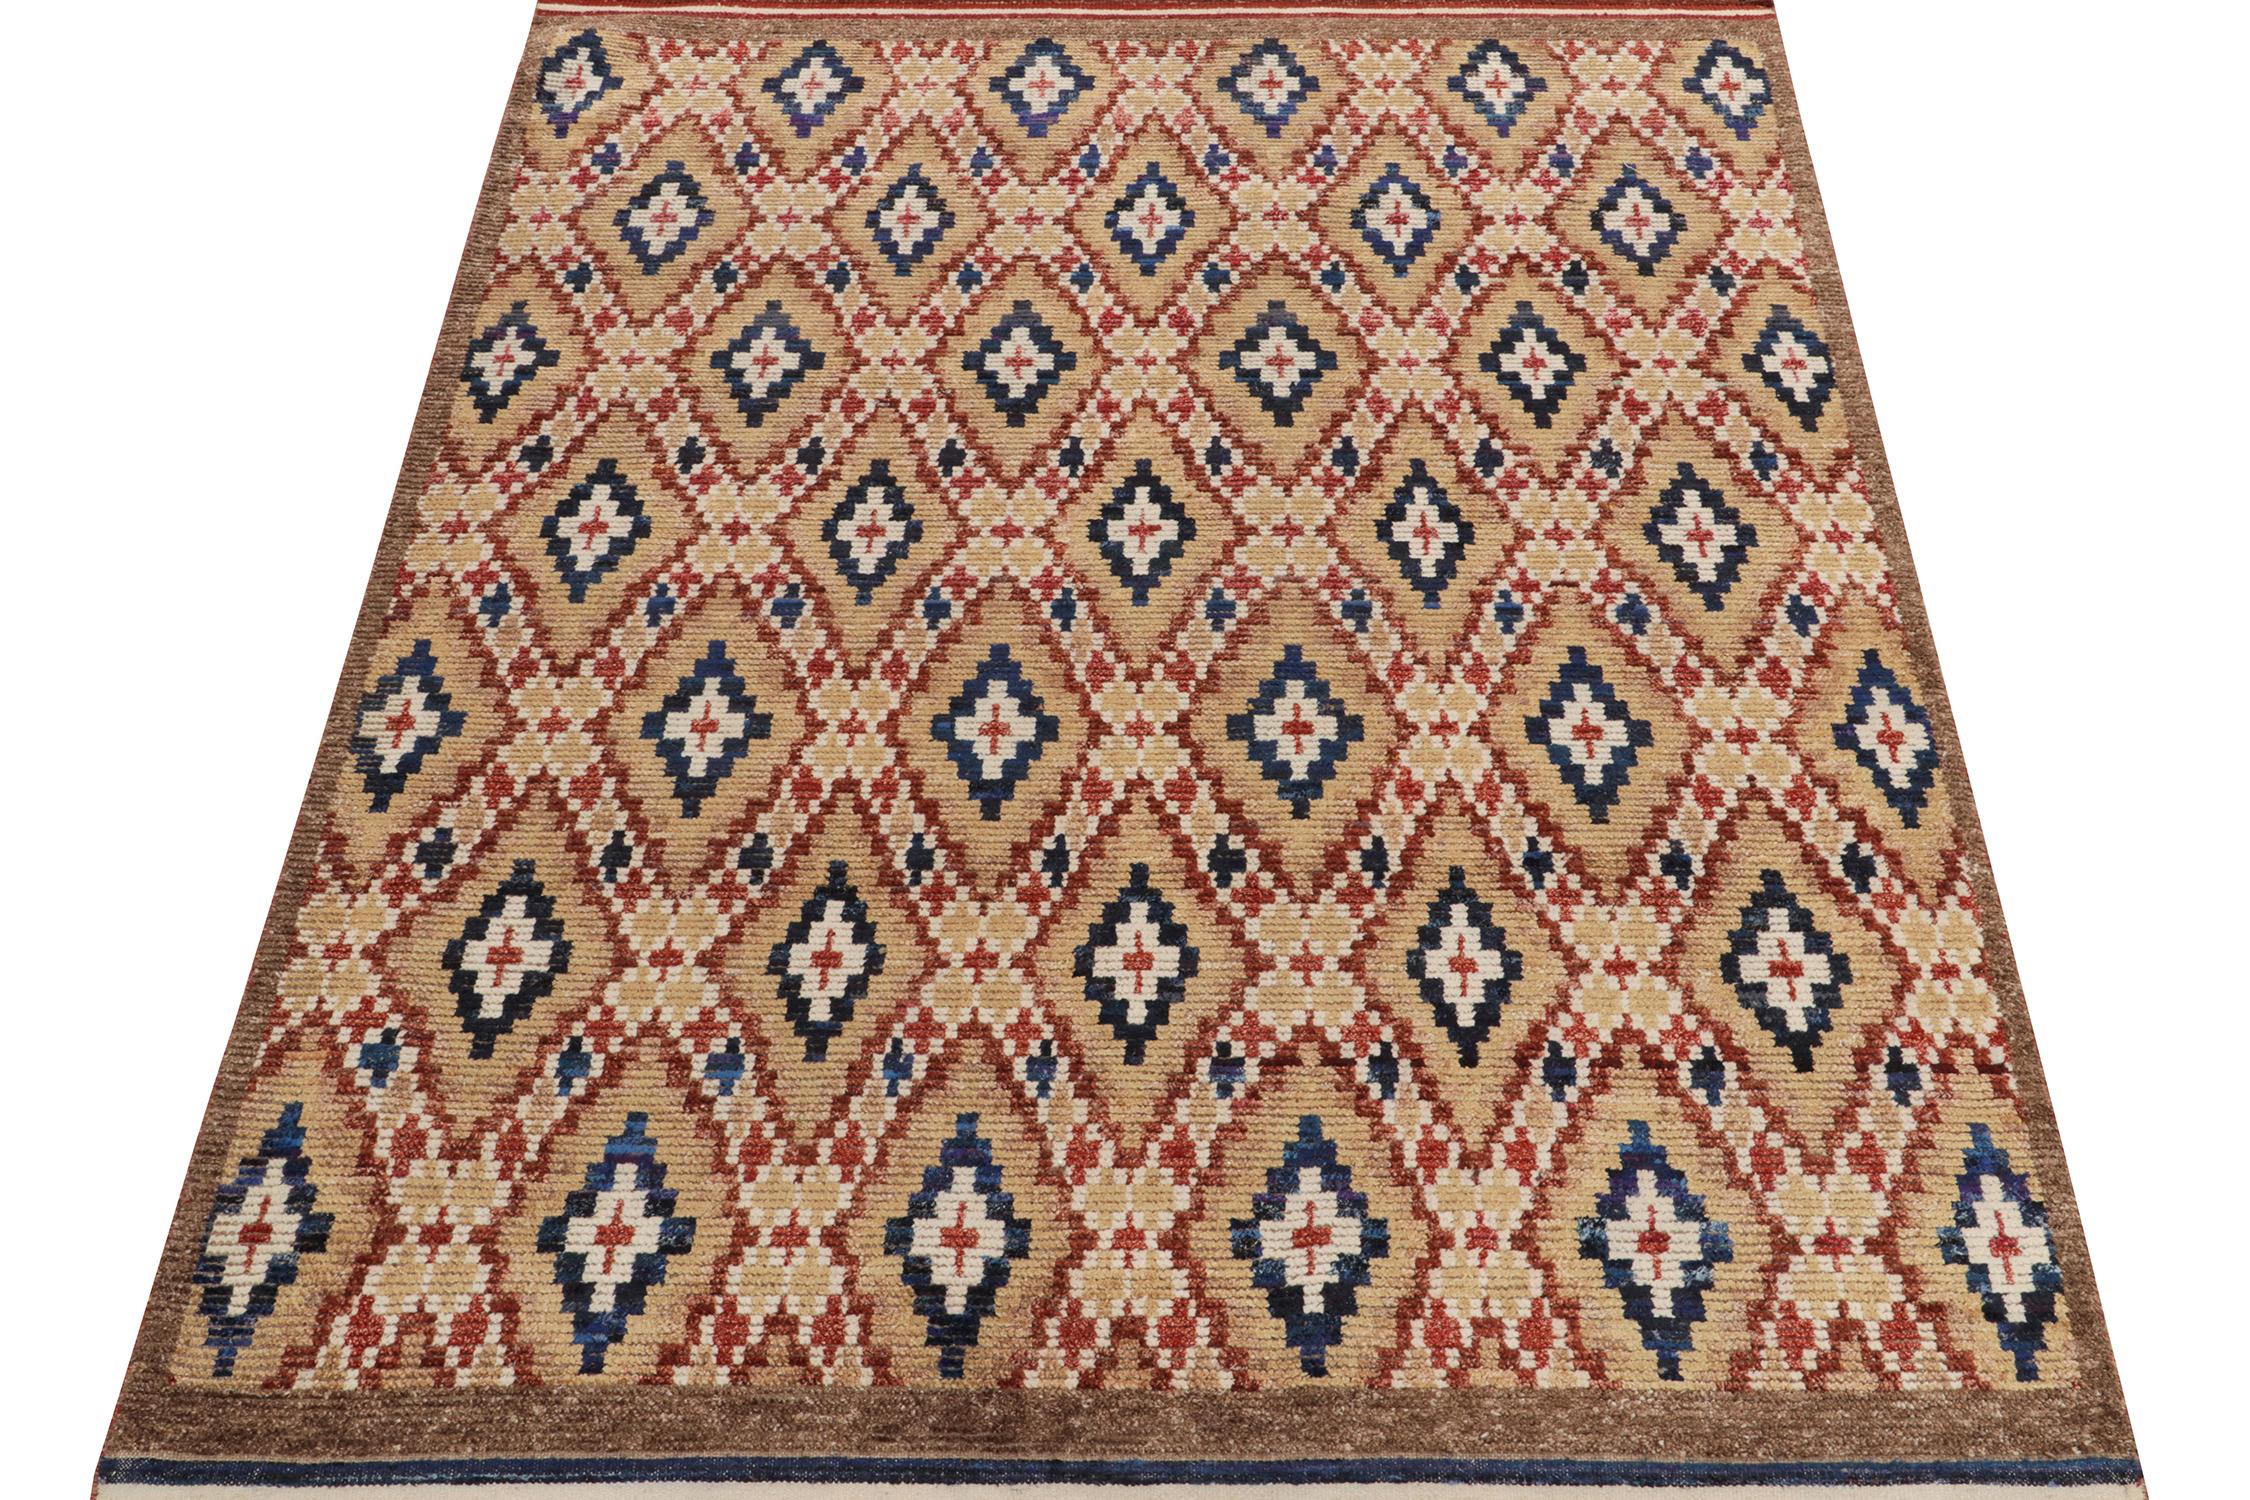 Hand-knotted in wool, this 6x8 contemporary rug from our Moroccan Collection carries a unique interpretation of the celebrated tribal weaving design.

Inspired by the titular nomadic style, the piece enjoys a high-low texture married to the diamond